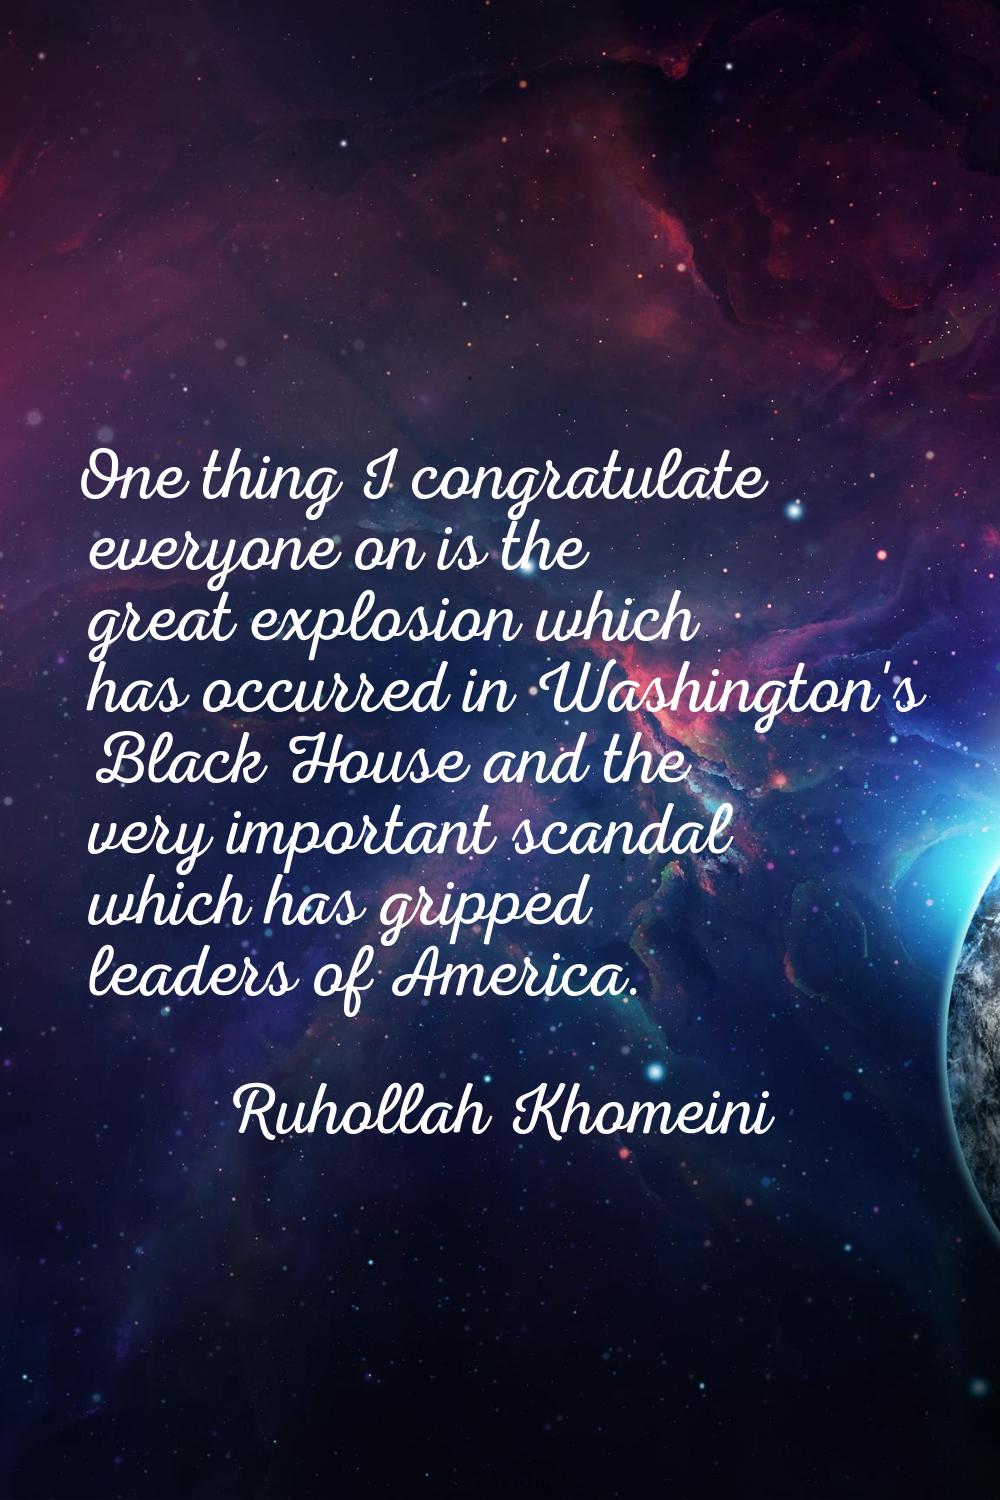 One thing I congratulate everyone on is the great explosion which has occurred in Washington's Blac